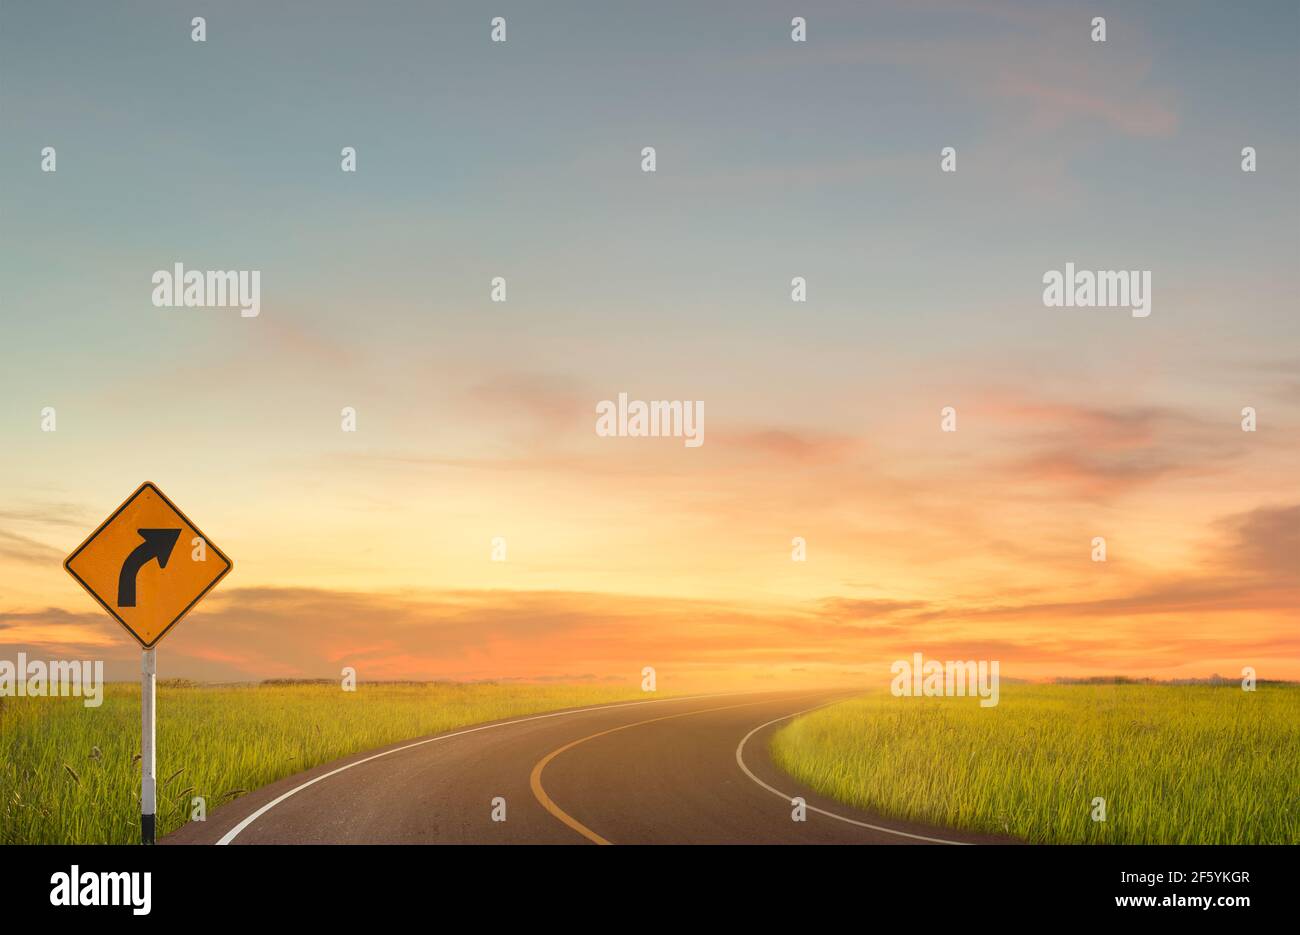 Sign curved road on the way at the natural sunset over field or meadow. Countryside Landscape Under Scenic Colorful Sky At Sunset. Nature Concept. Stock Photo